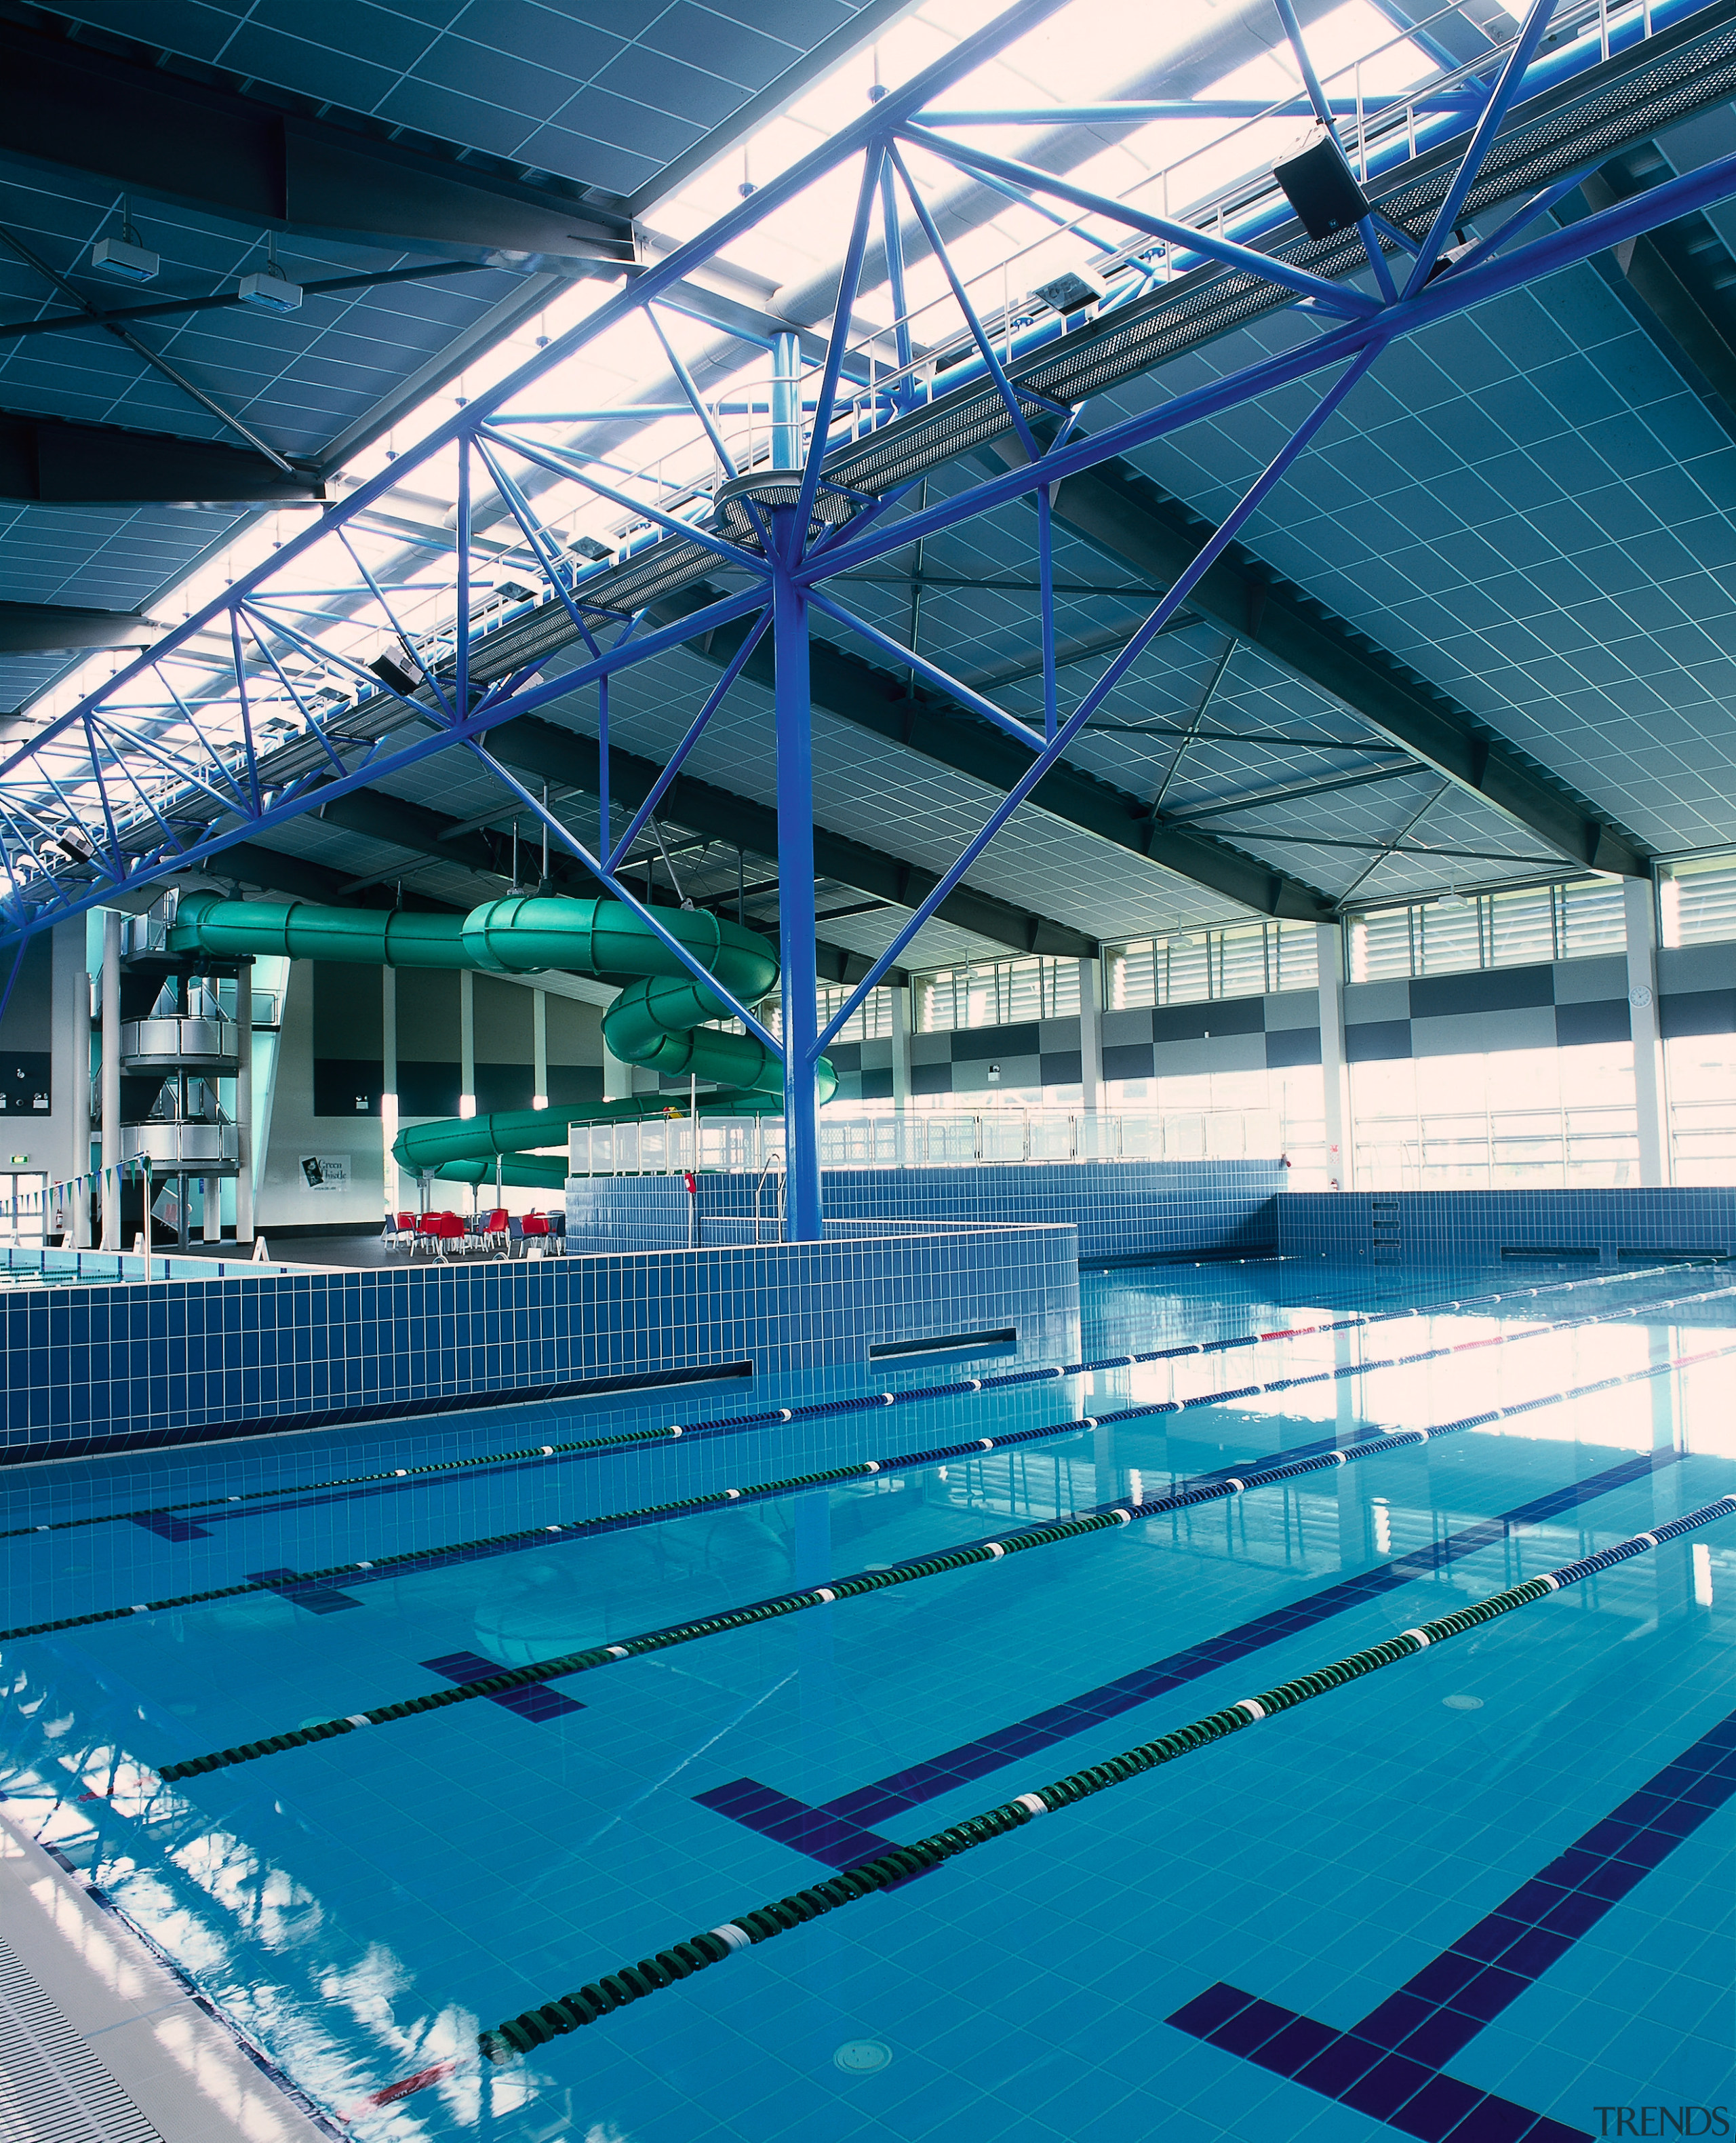 View of pool complex with ceiling panels and blue, leisure, leisure centre, resort town, sport venue, structure, swimming pool, water, teal